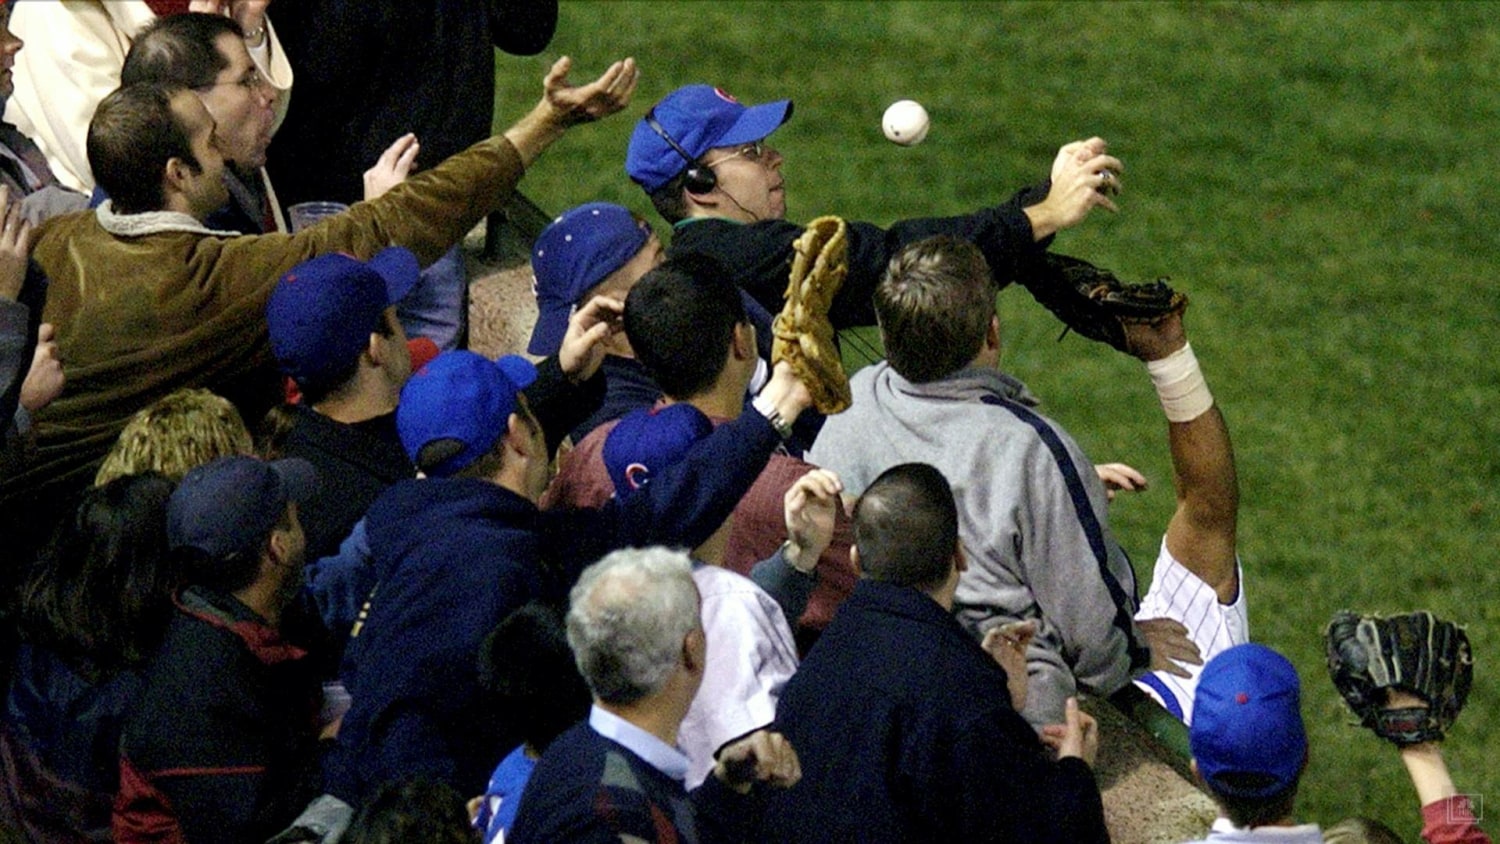 Fan dresses up as Steve Bartman at a Cubs game